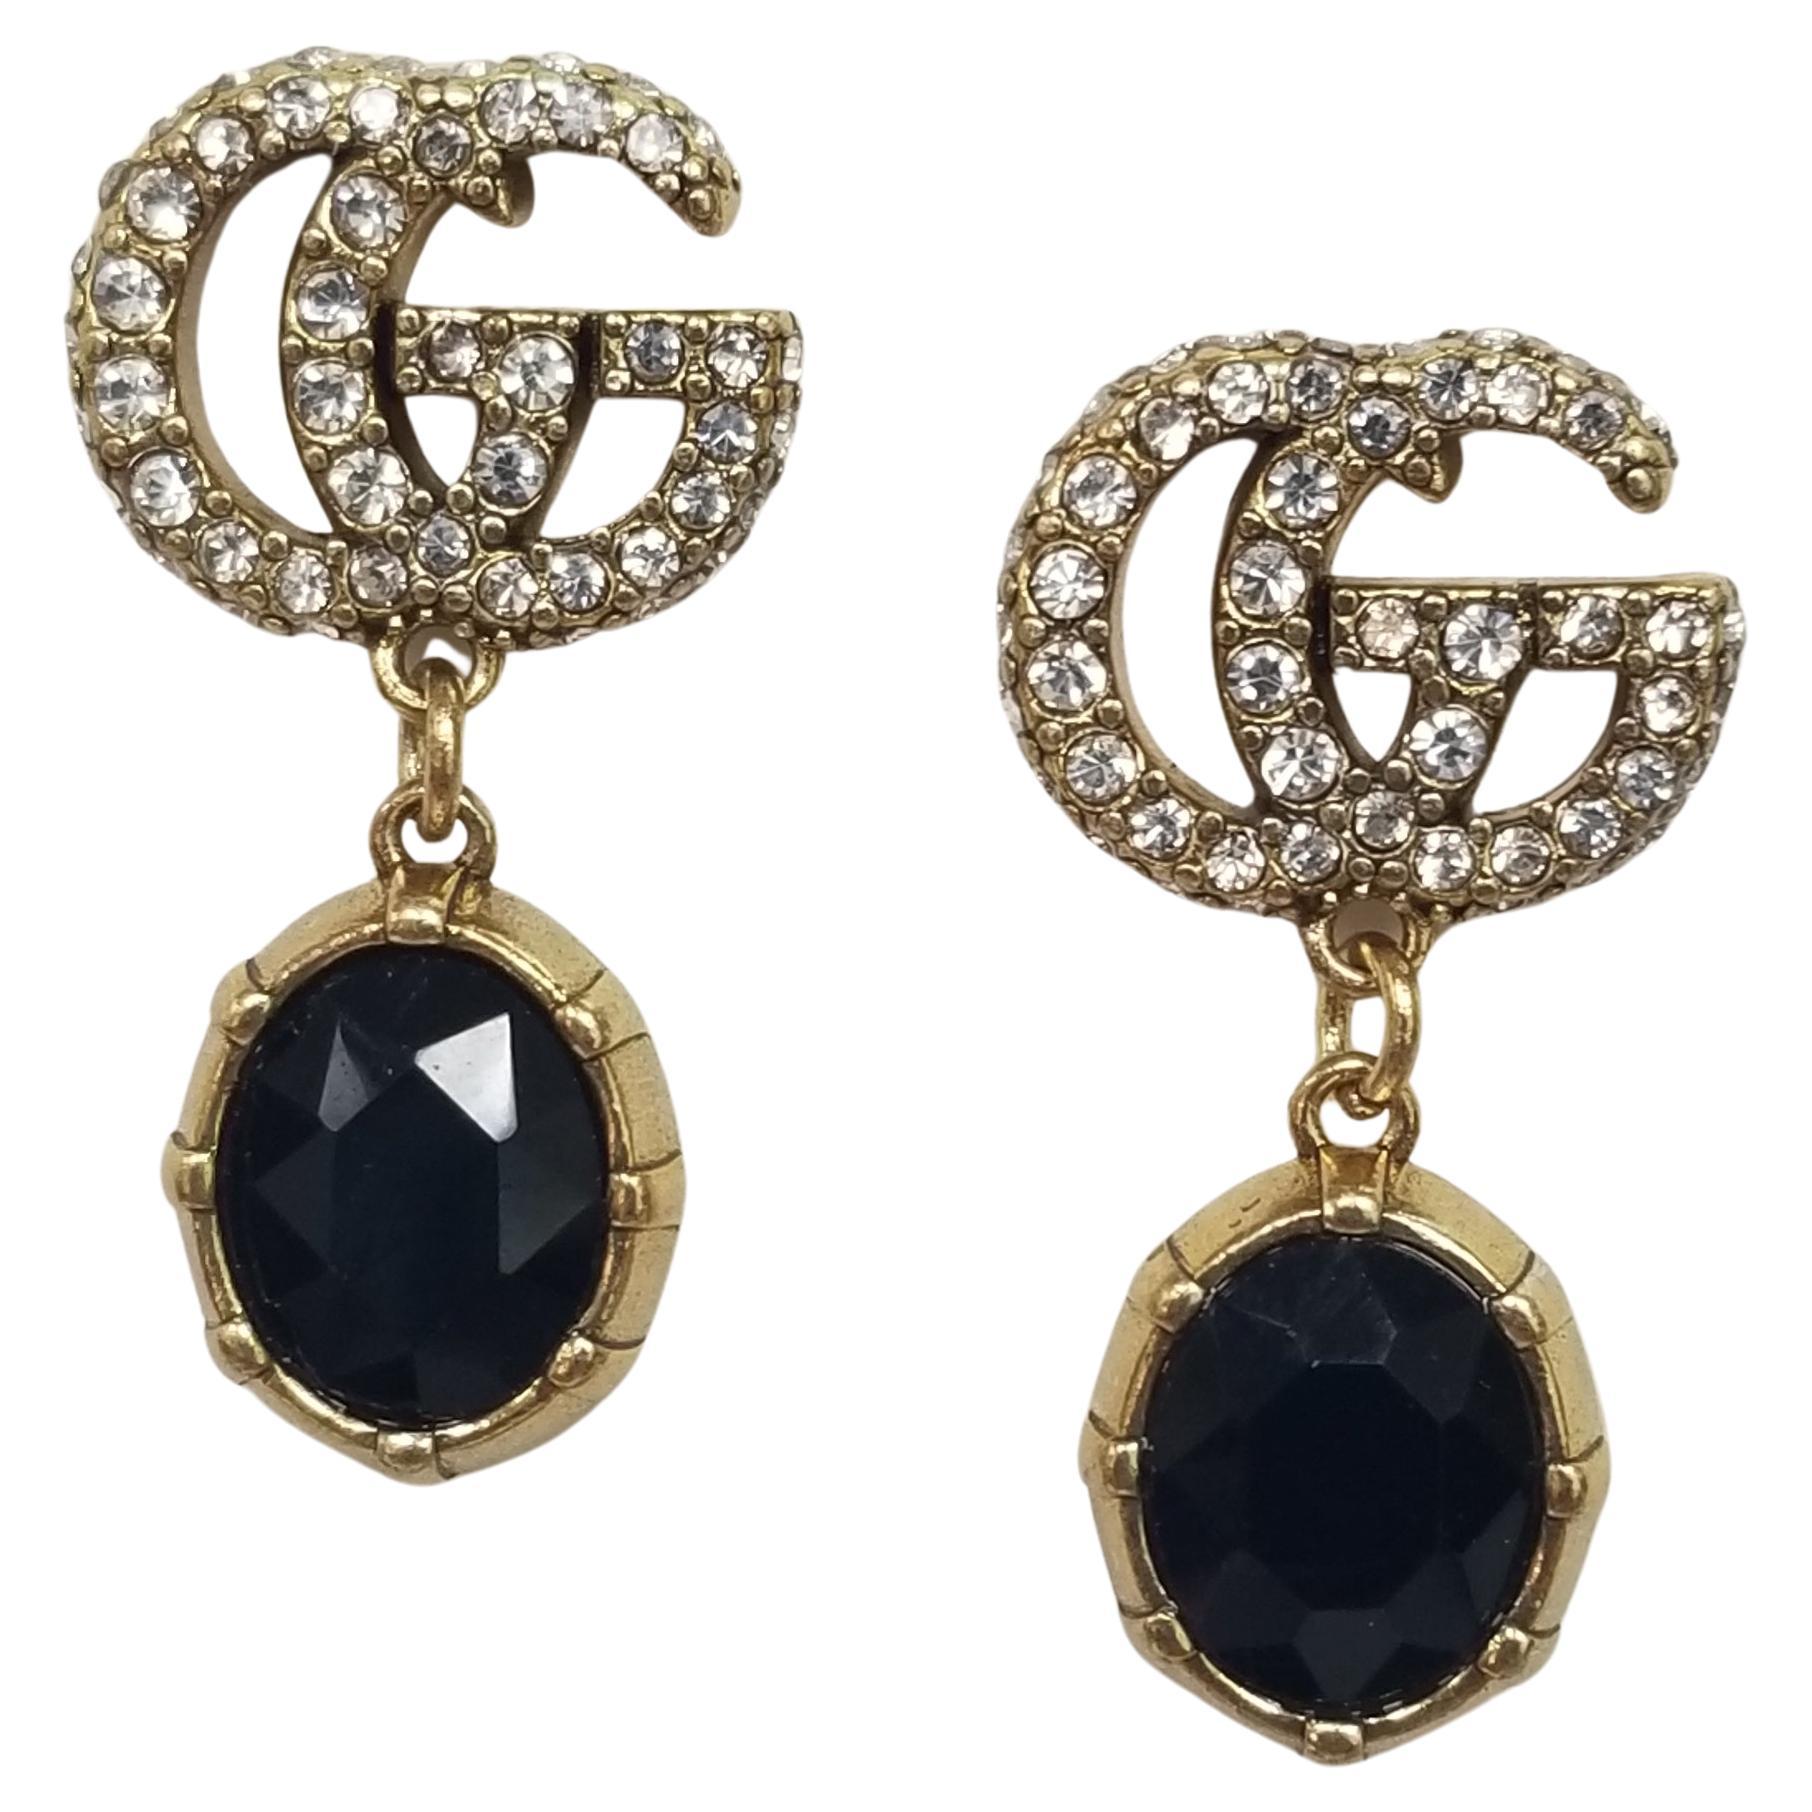 Gucci "GG" Logo in Crystals with Dangling Black Faceted Crystal Earrings For Sale